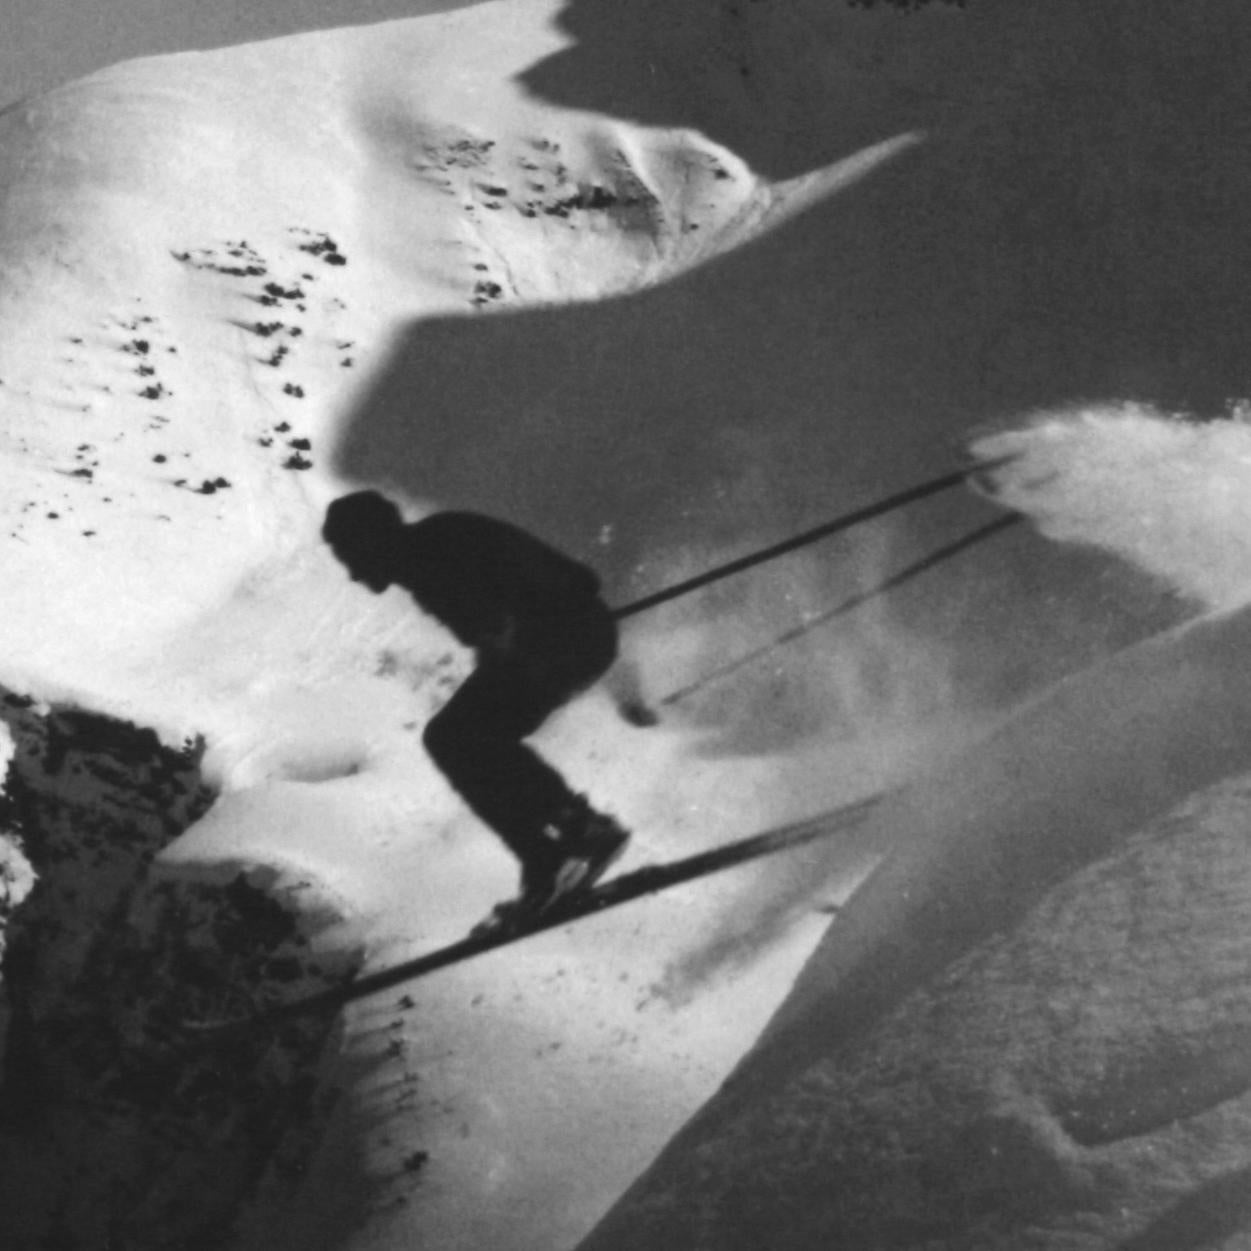 English Alpine Ski Photograph, 'THE JUMP' Taken from 1930s Original For Sale